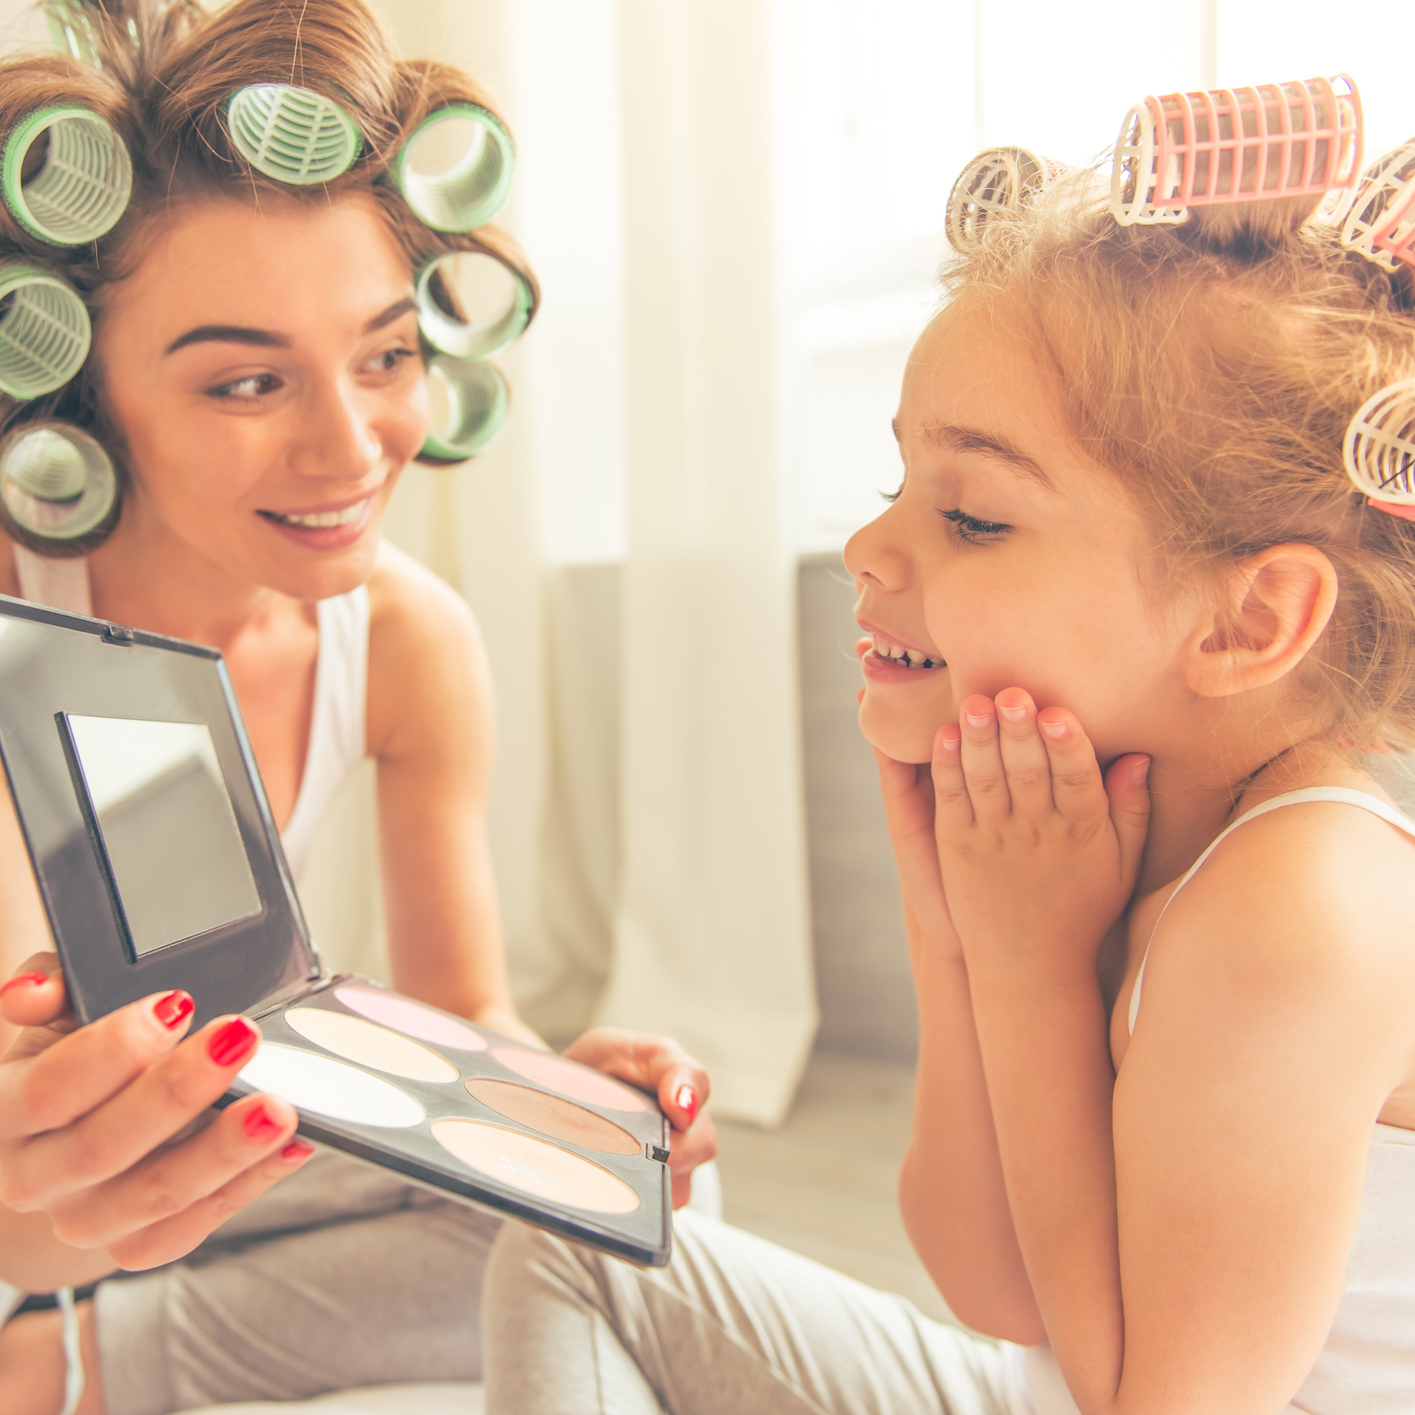 A mom and her young daughter, wearing curlers, looking into a mirror.